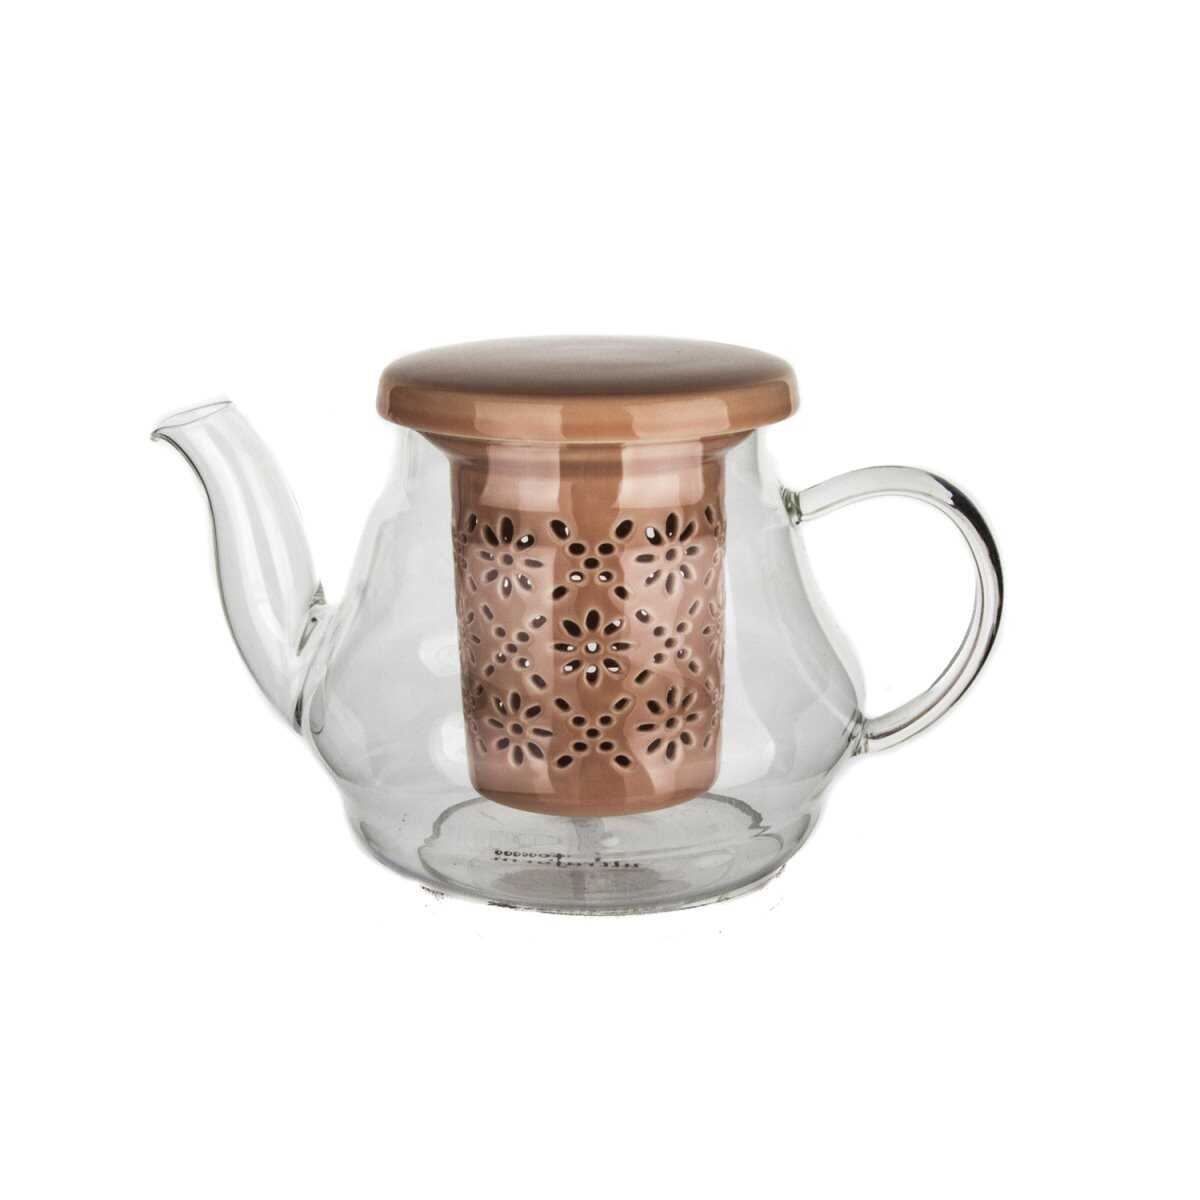 Ultraform Porcelain Teapot with Strainer and Lid Pink